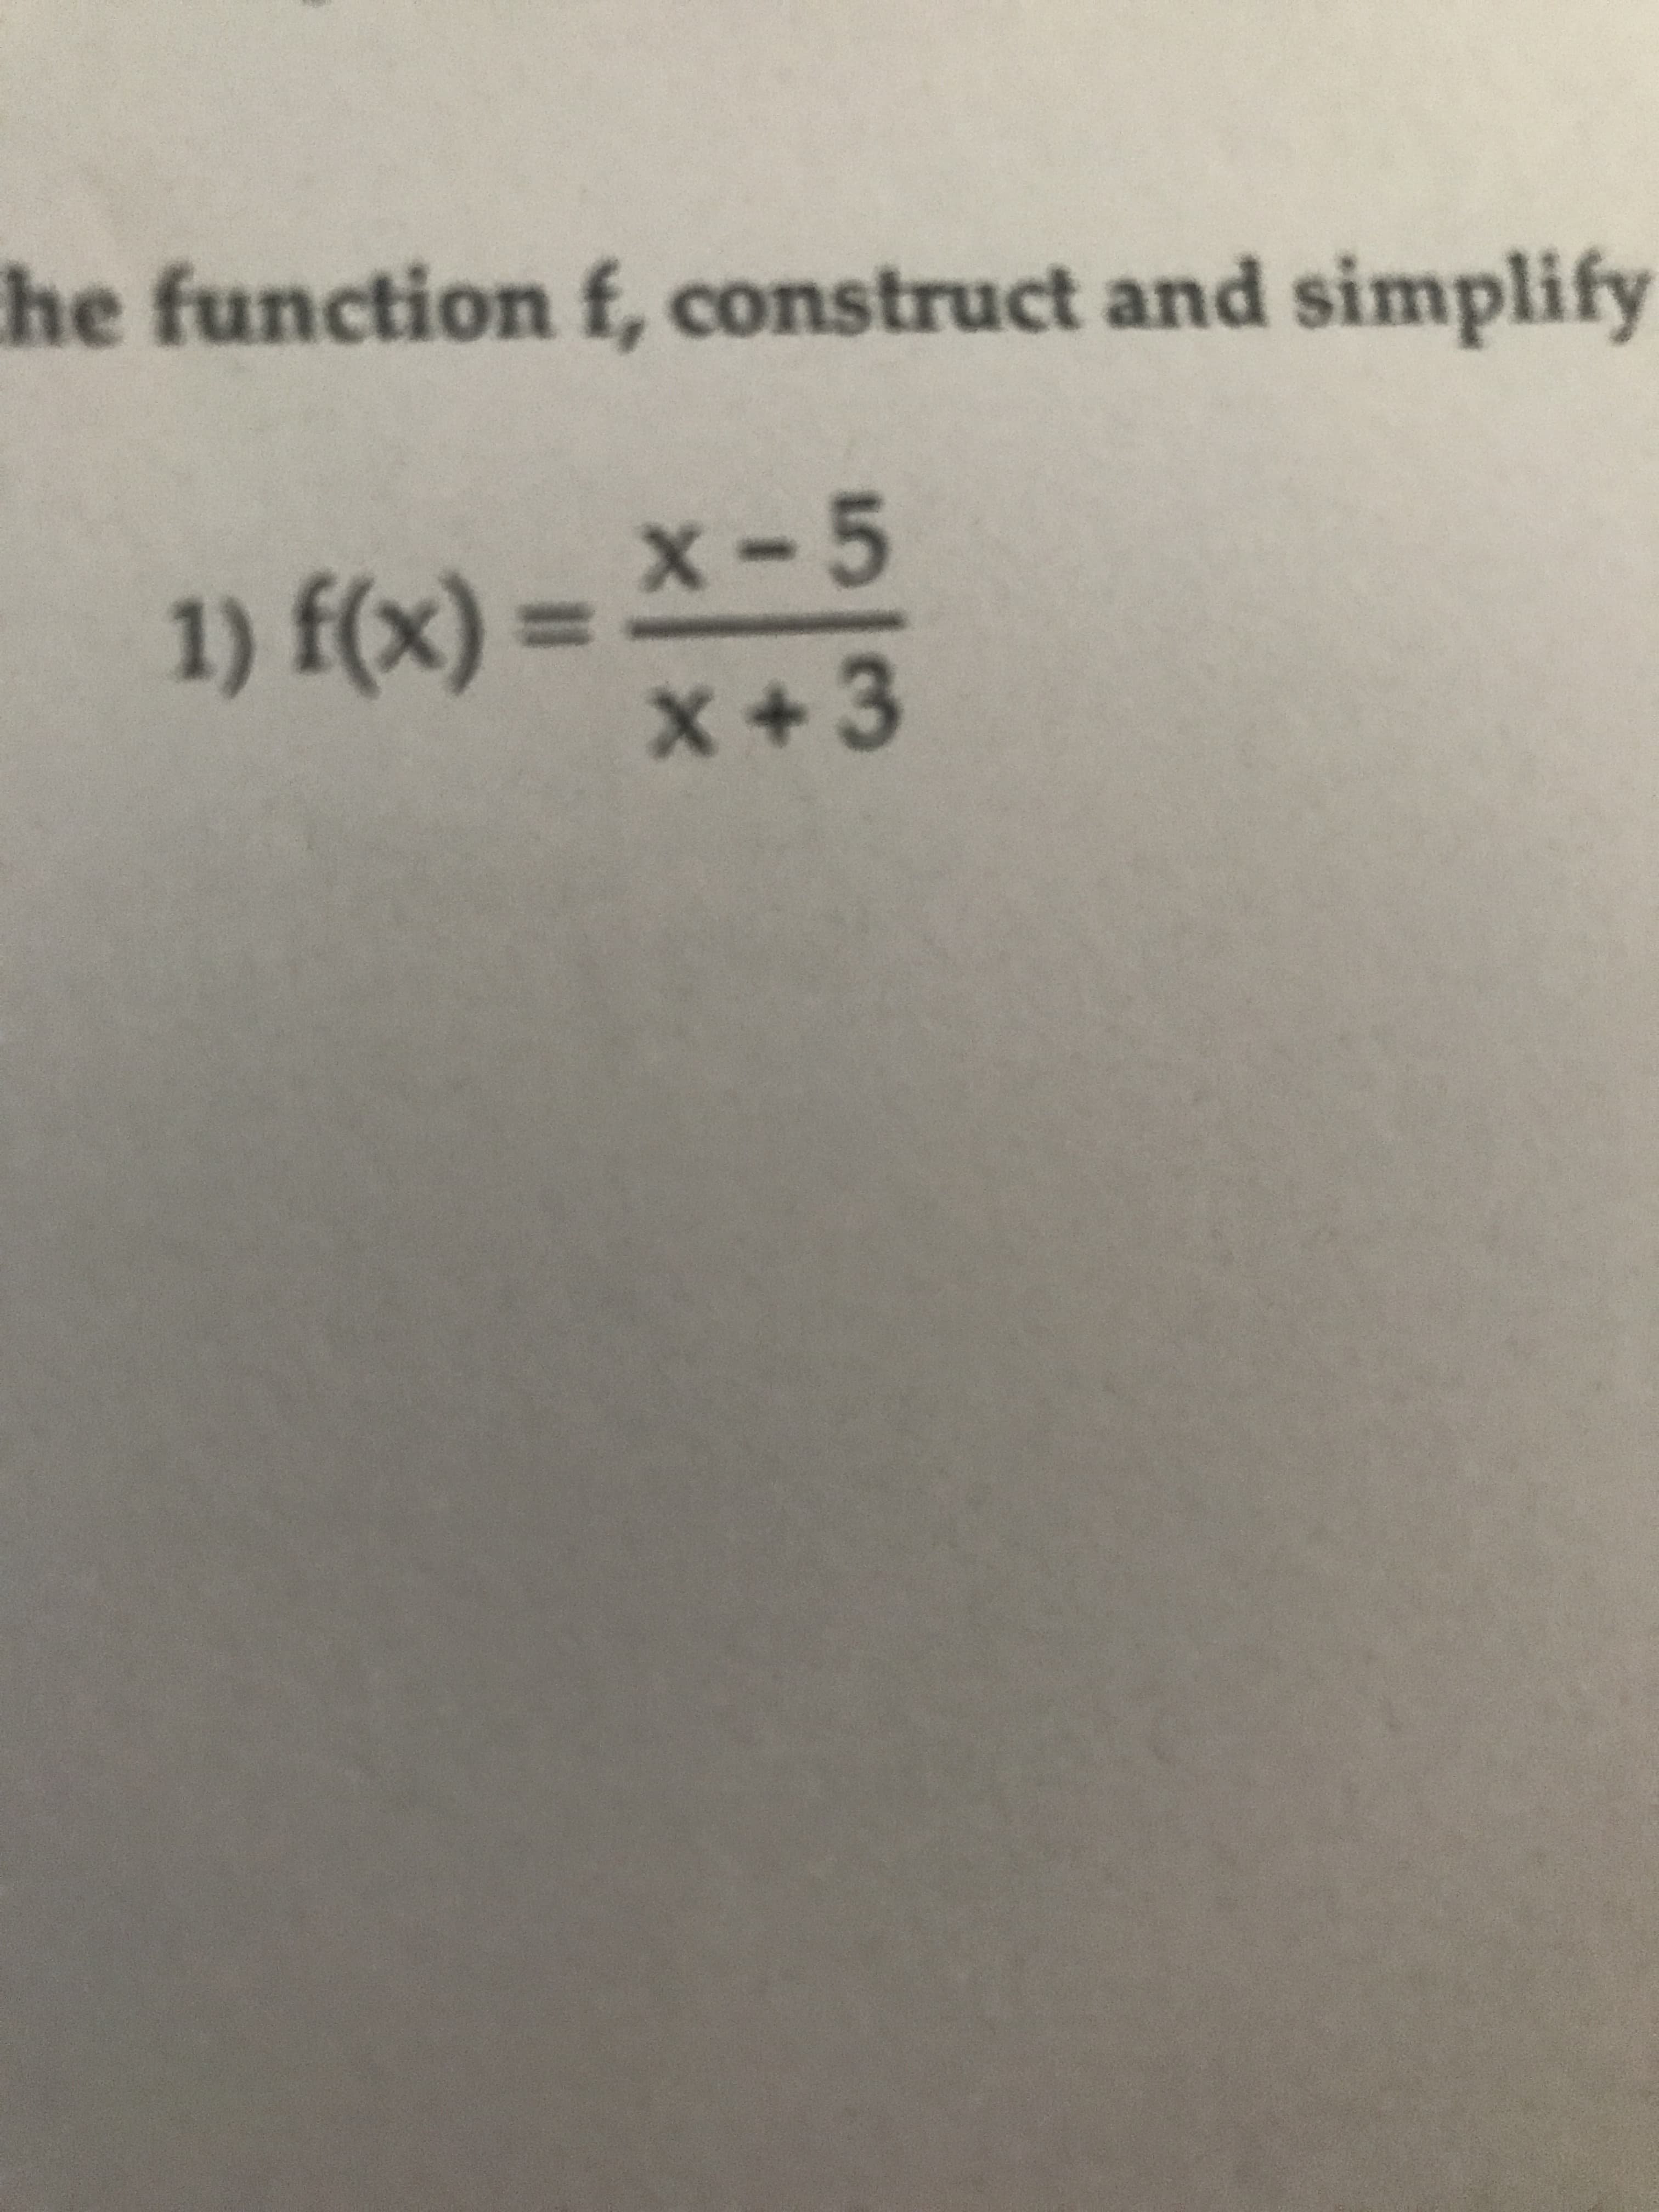 he function f, construct and simplify
x-5
1) f(x) =
x+3
%3D
